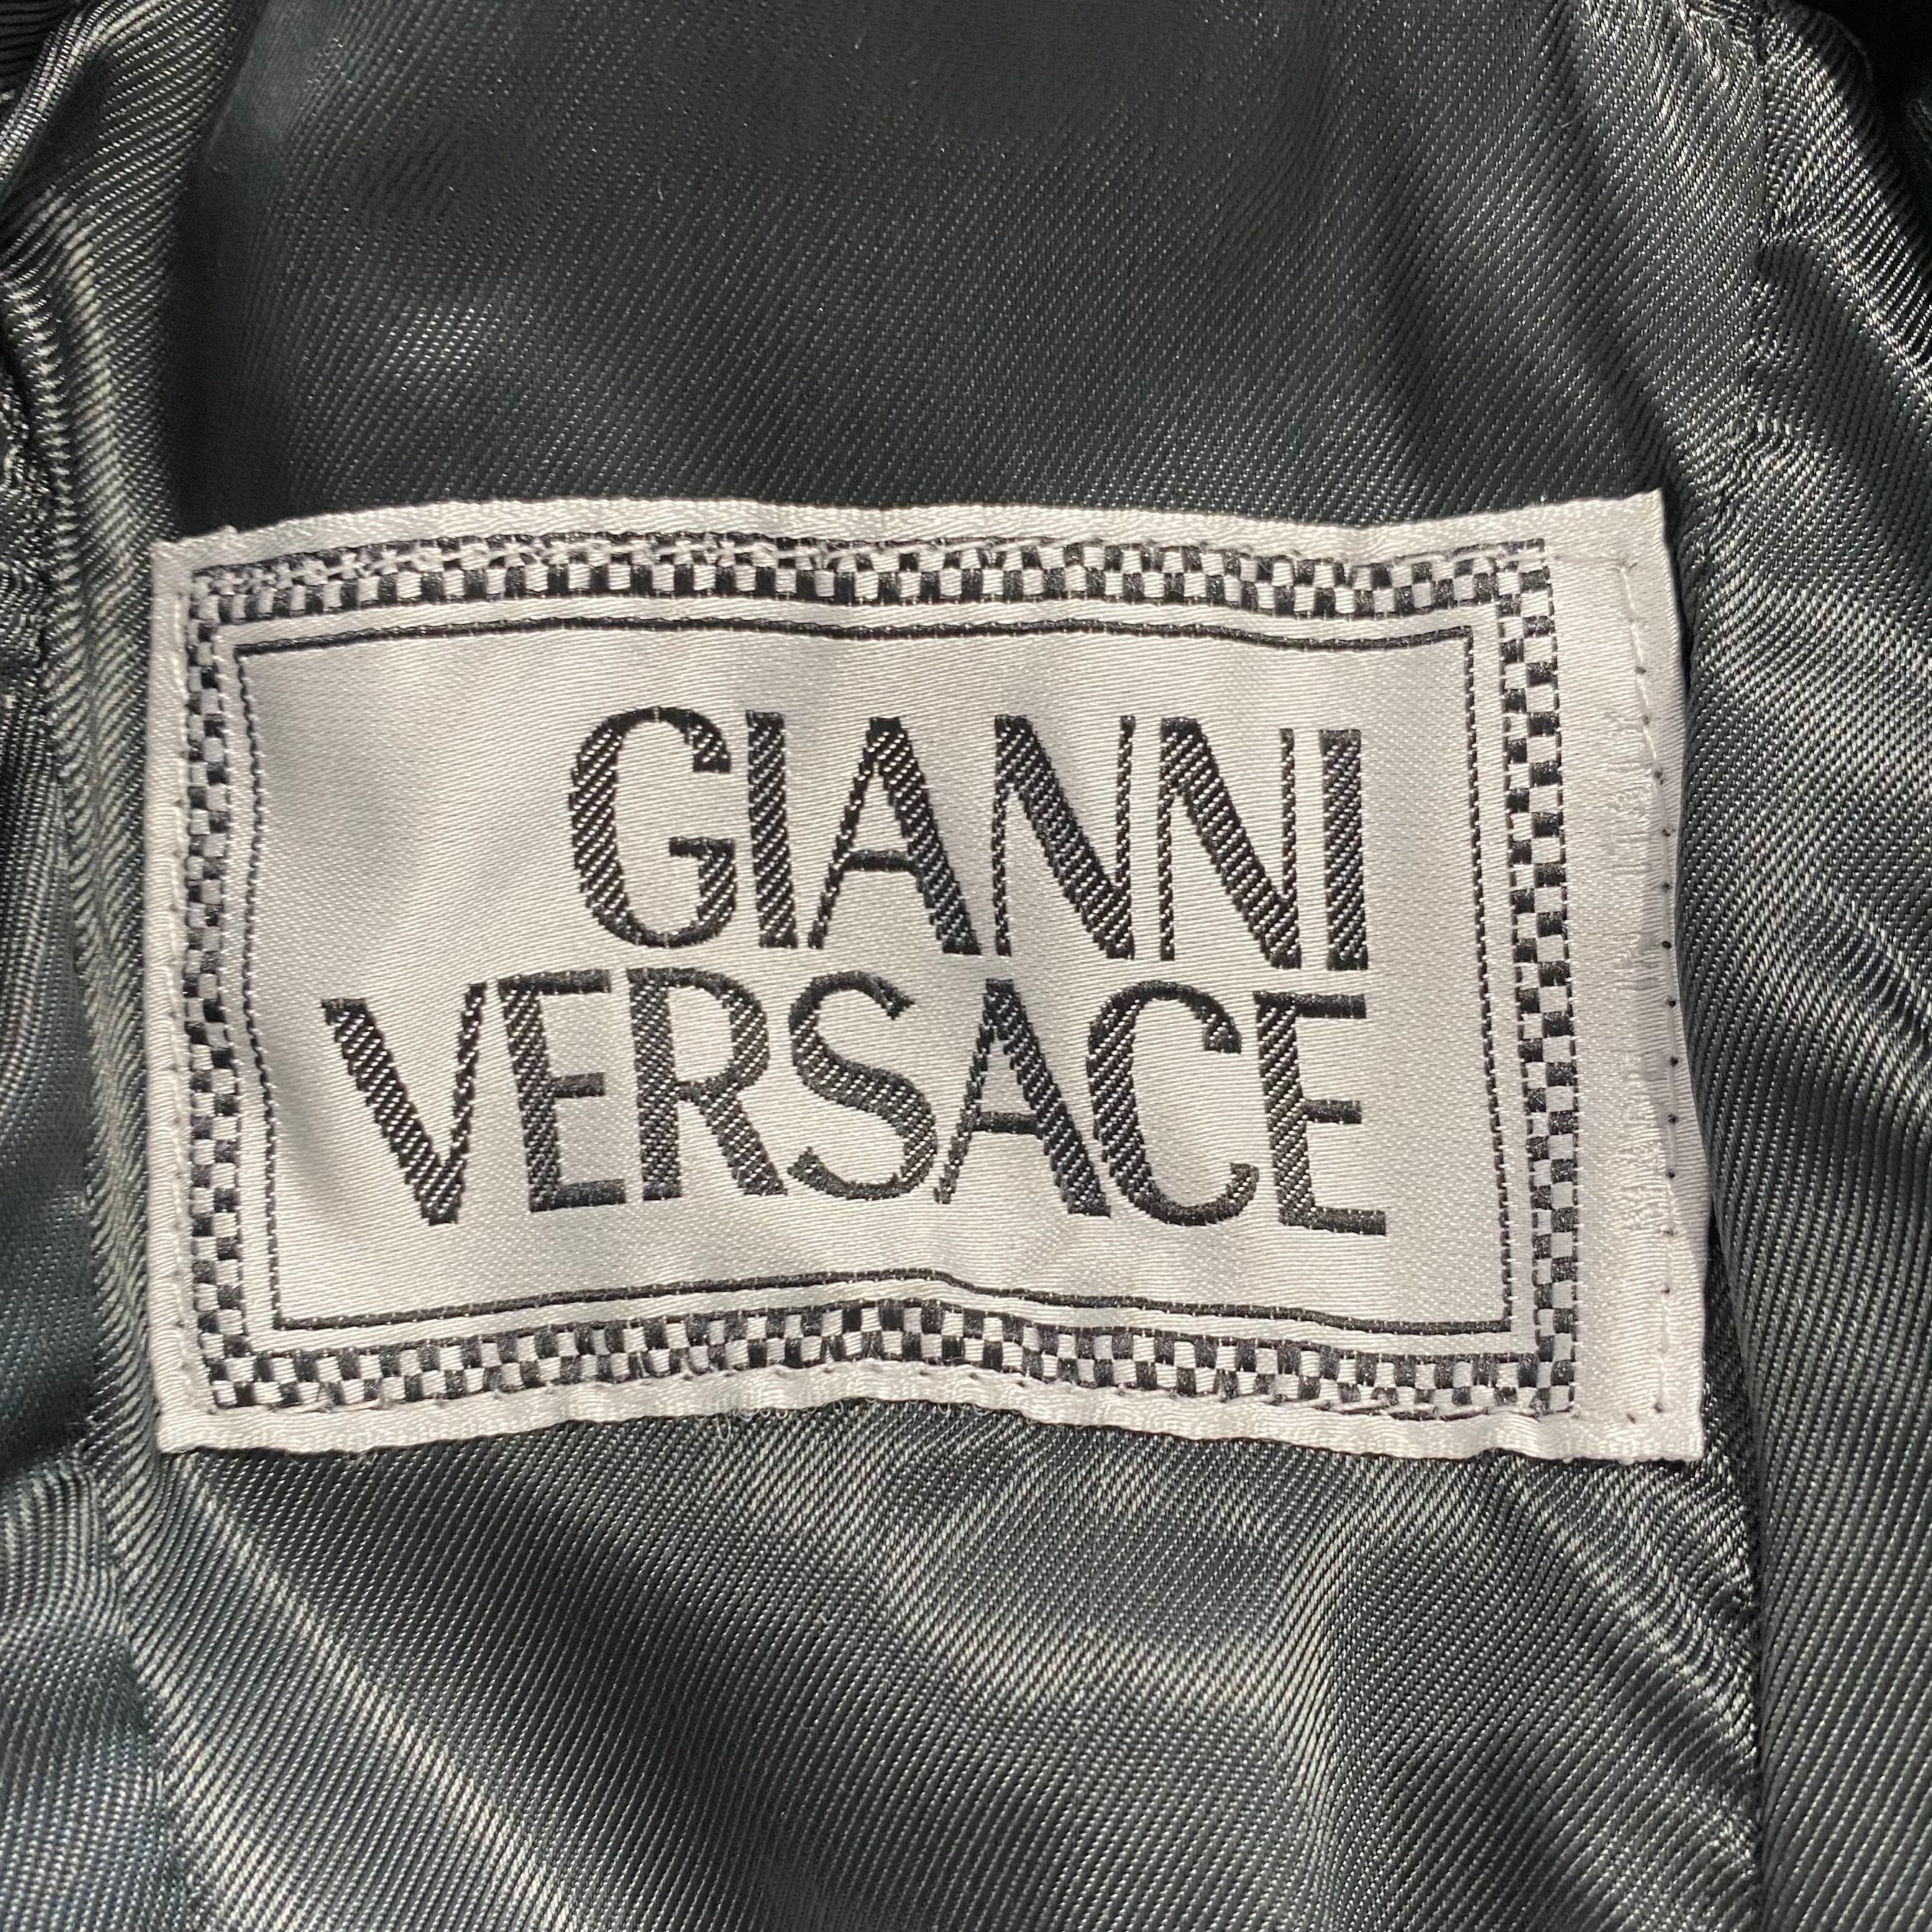 Gianni Versace 1994 Safety Pin Leather Skirt Suit